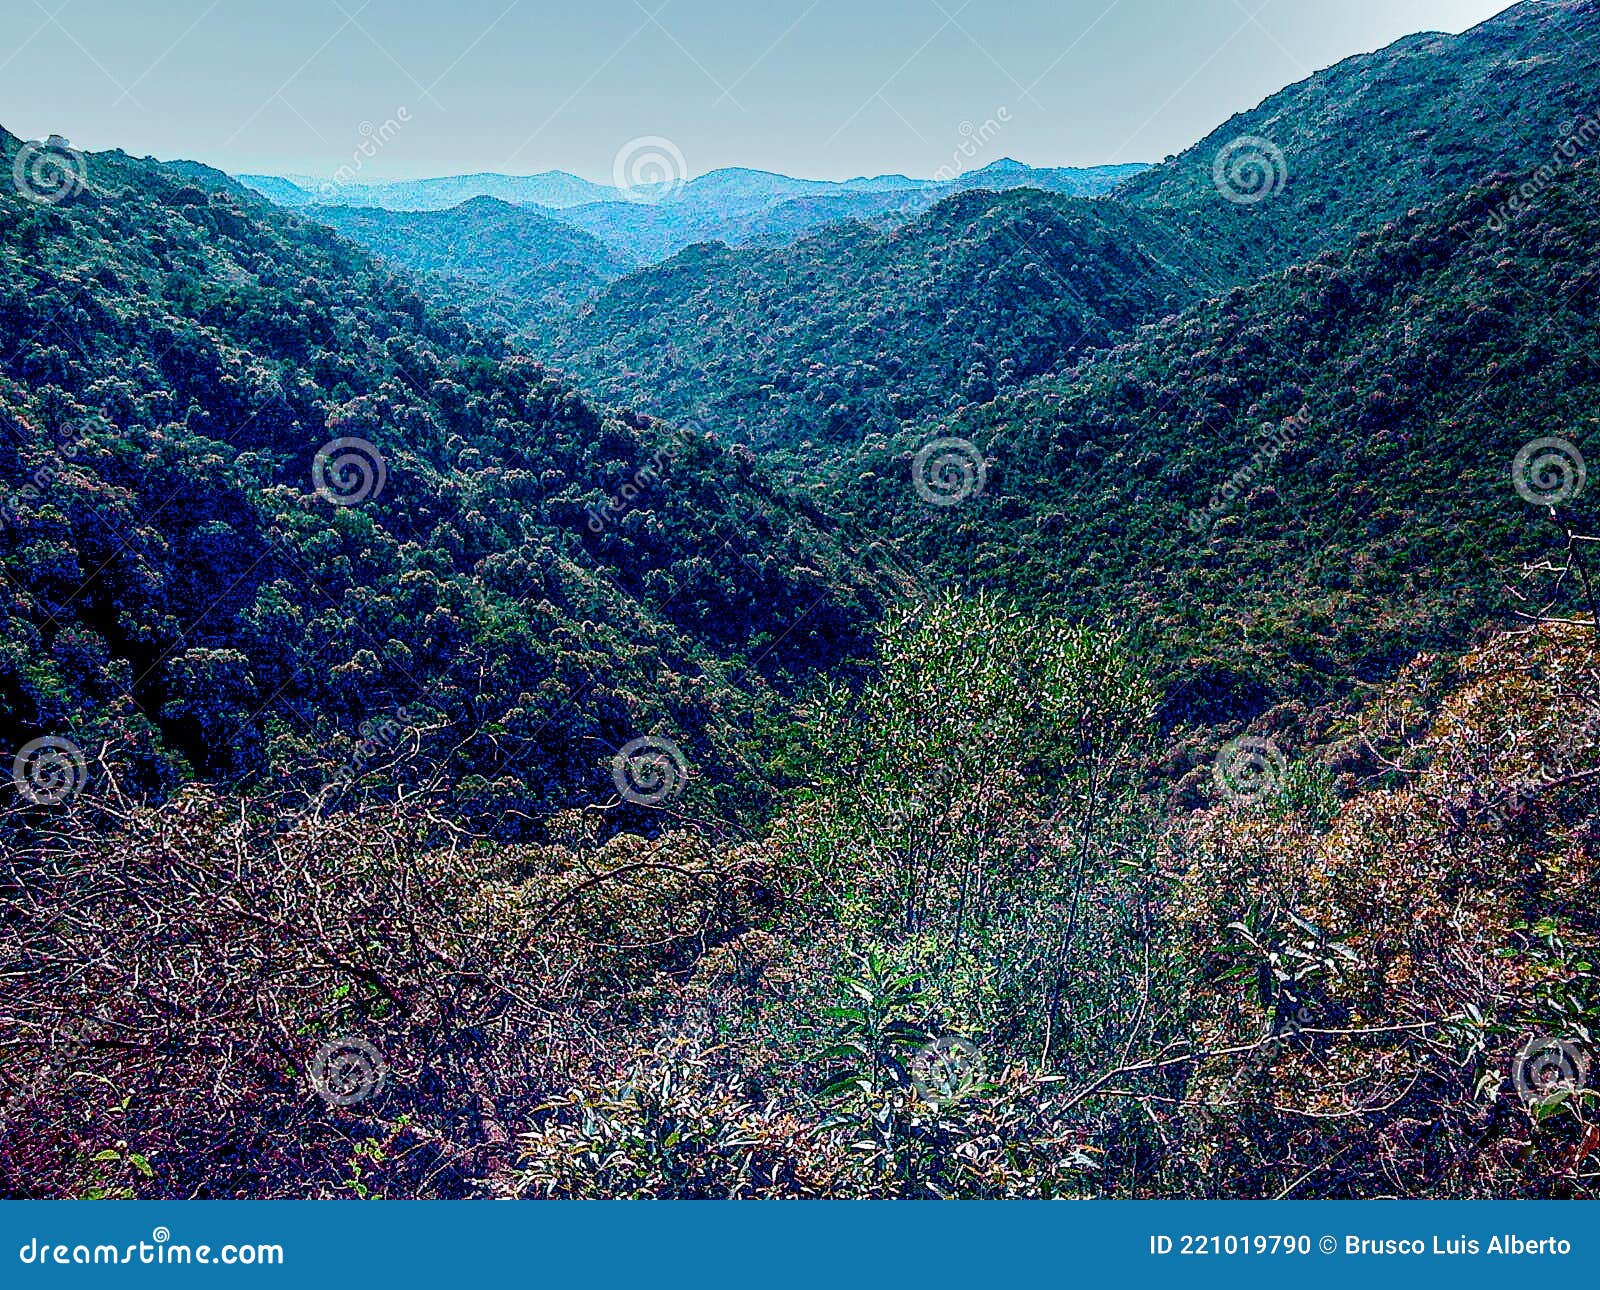 mountain landscape with valleys covered by a dense forest, sierras chicas, cordoba, argentina